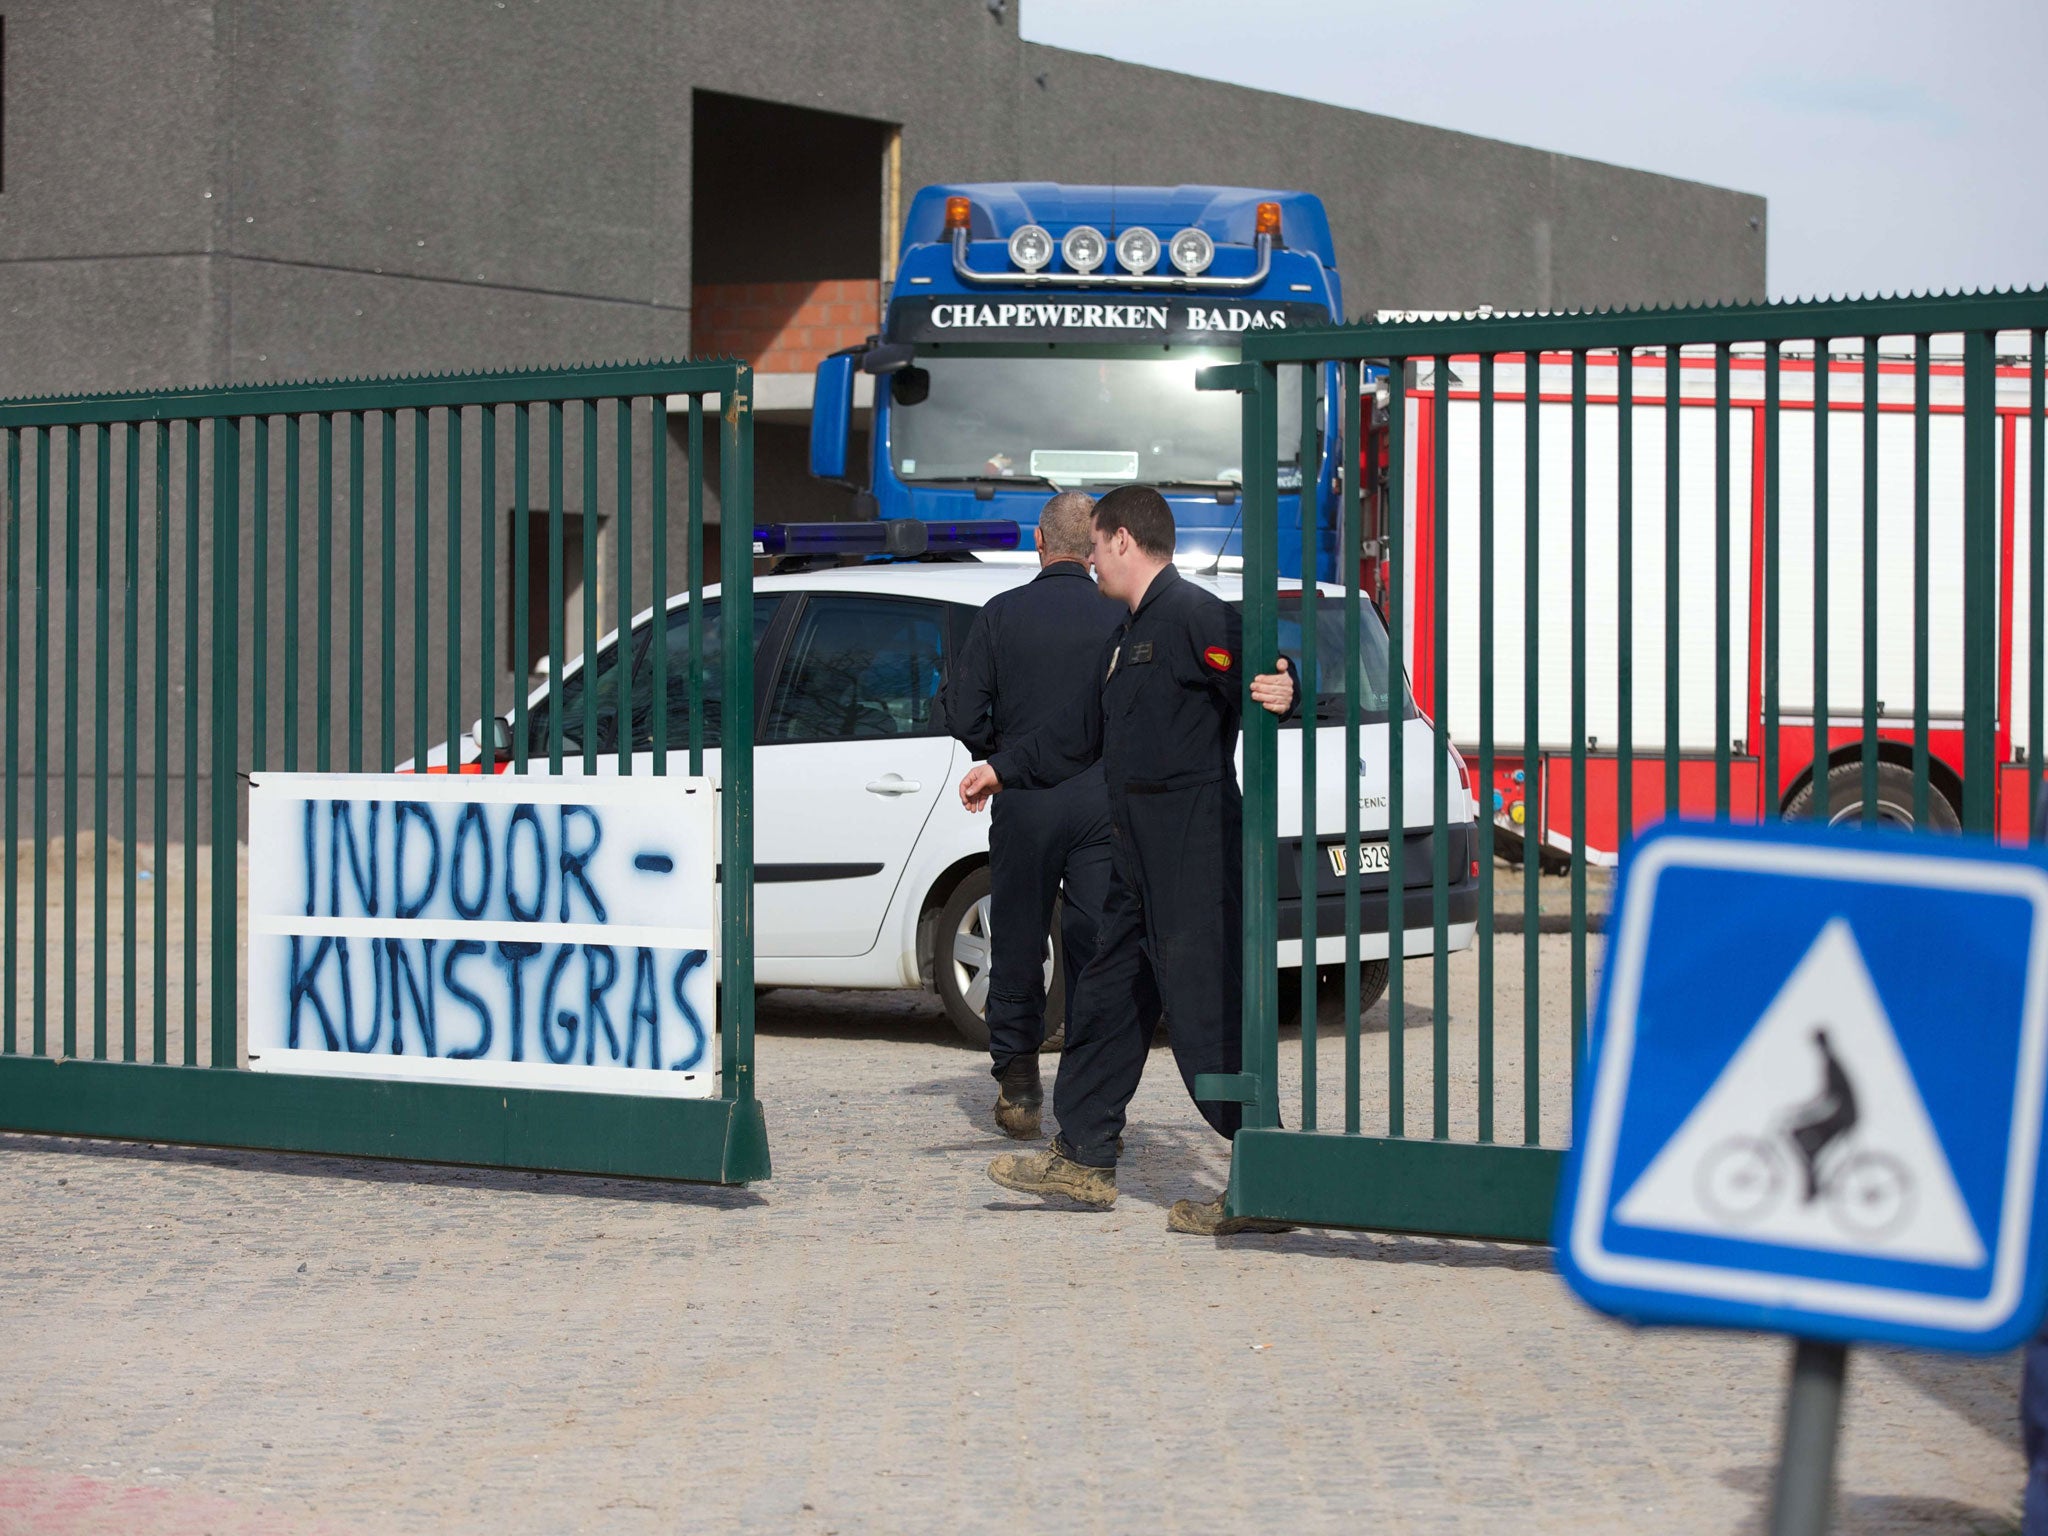 A man closes the gate to an industrial site where a World War I era shell exploded during excavation works on March 19, 2014, in Ypres, Belgium, killing two workers and severely injuring another.